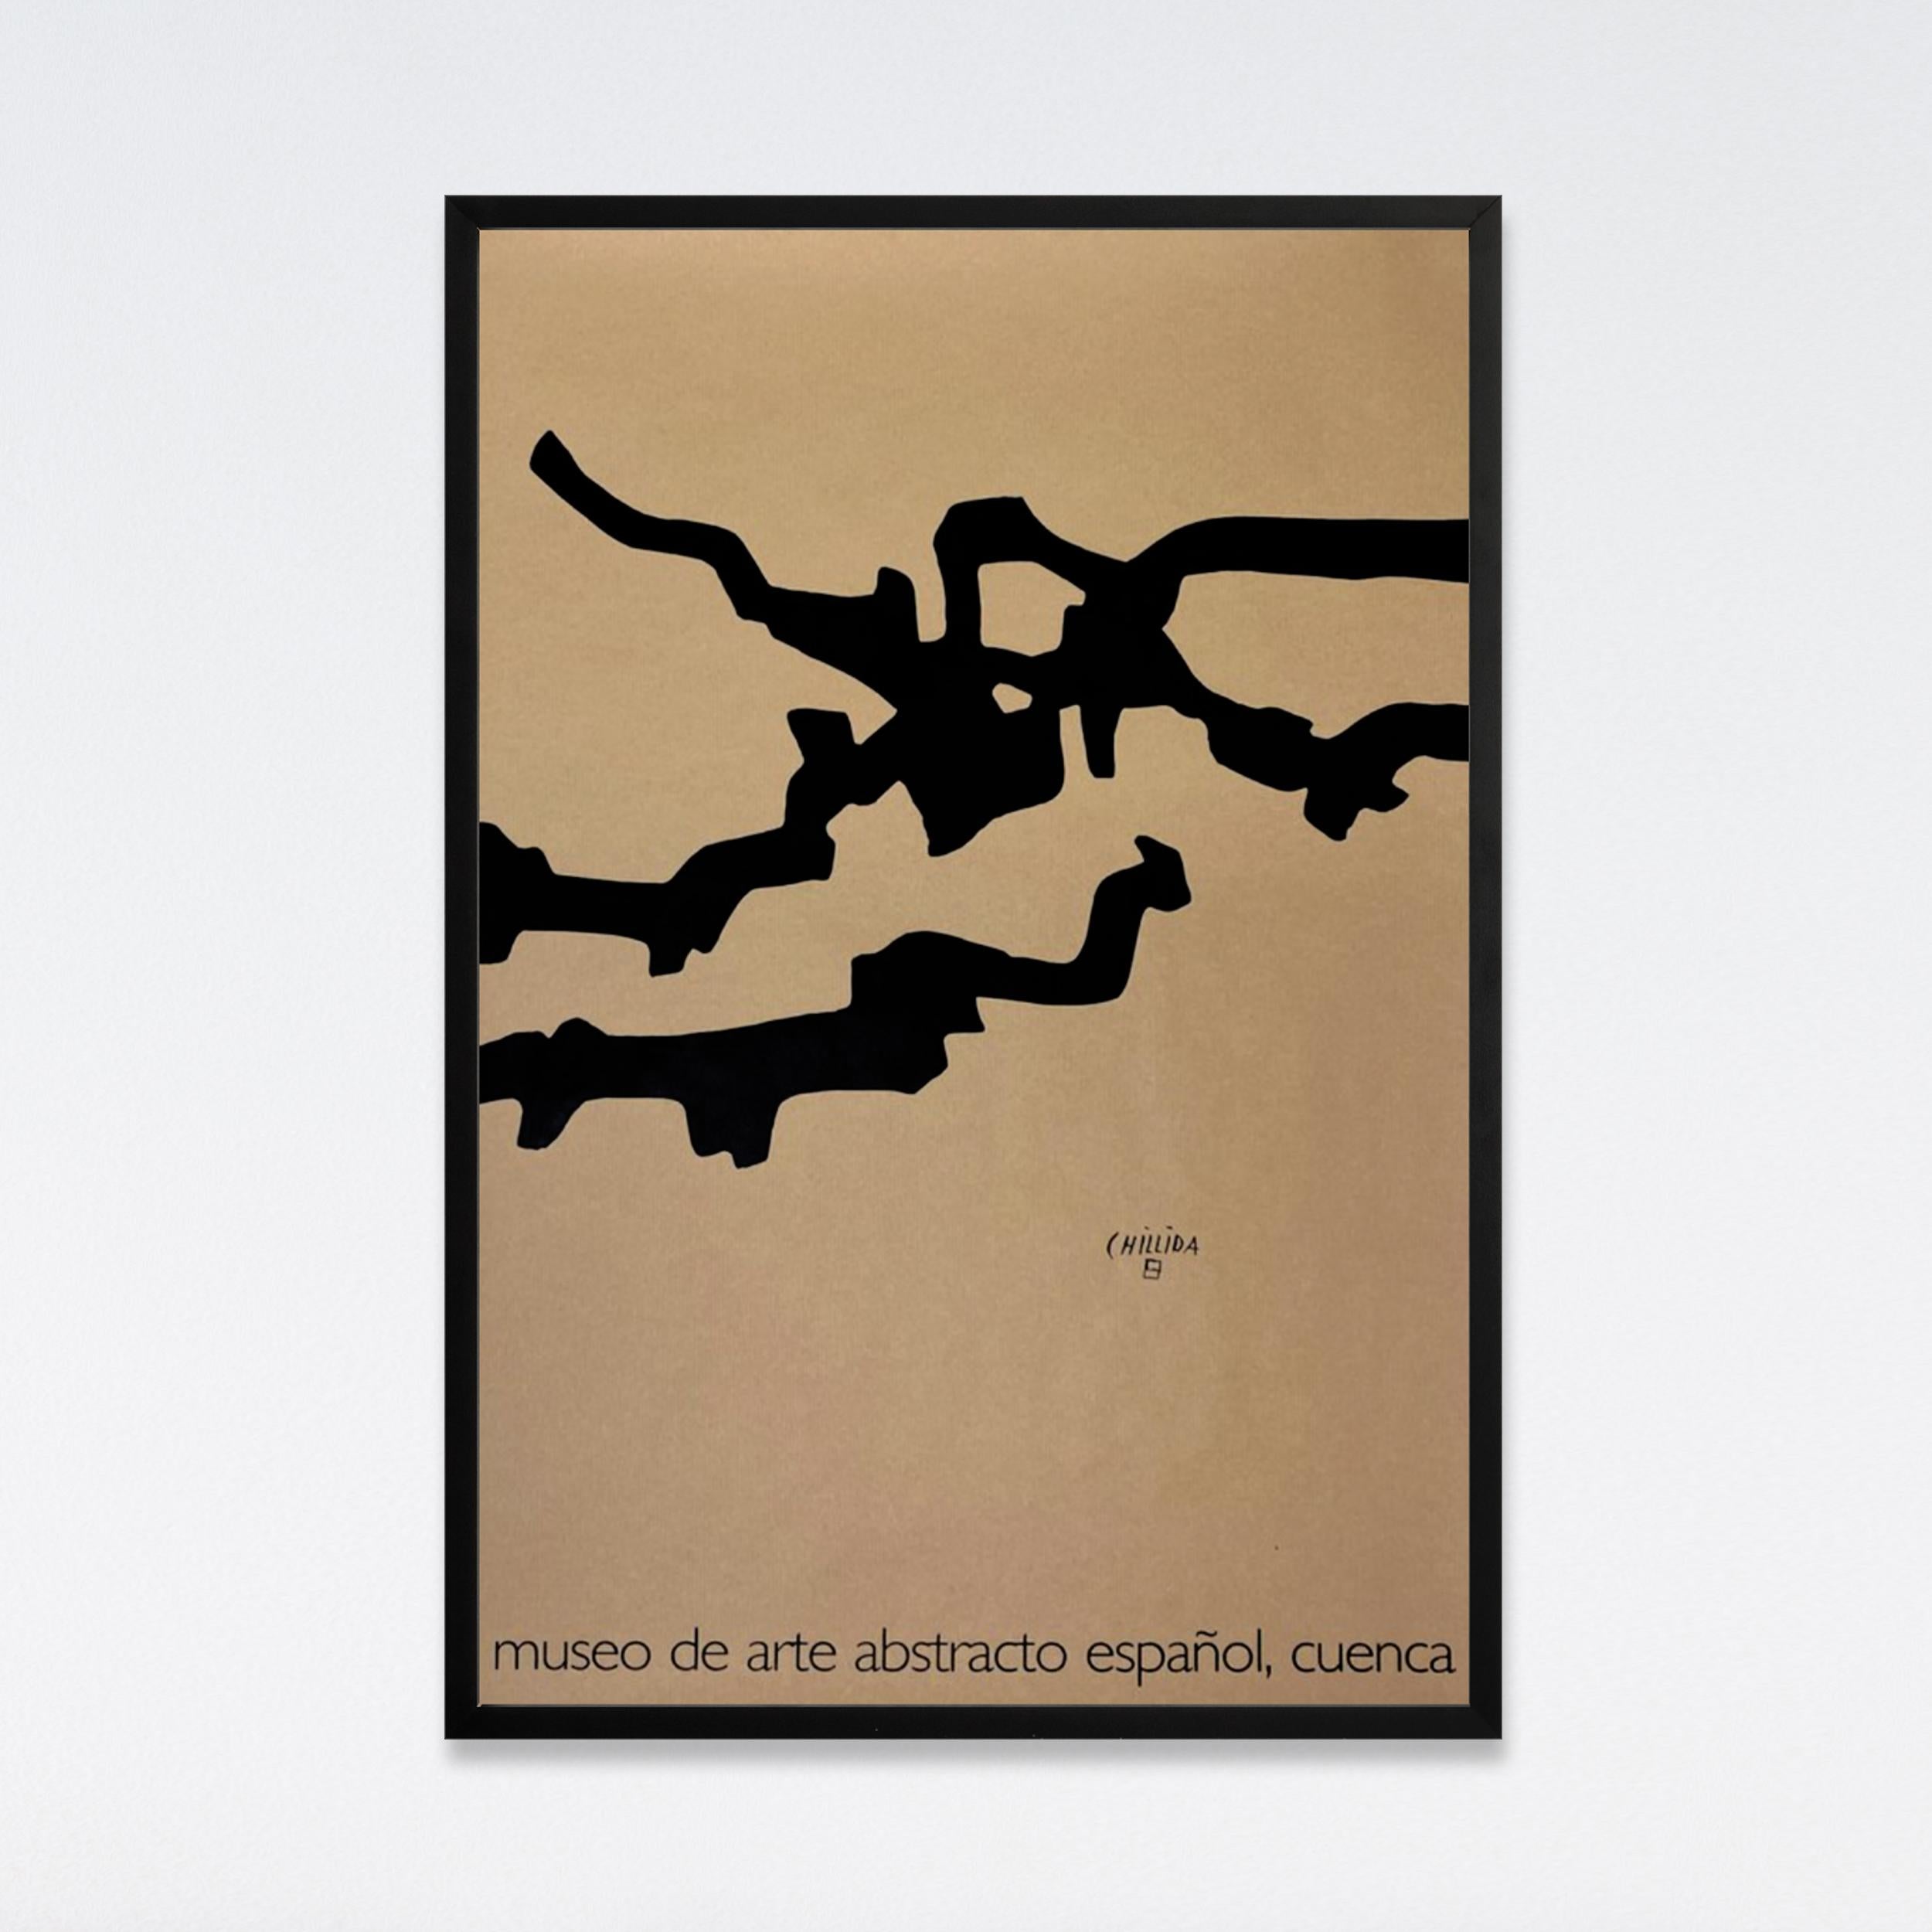 A lithographic poster published by The Museo de Arte Abstracto Español in Cuenca, Spain. First print run.
Features an artwork by Eduardo Chillida. 

Condition: A-, near mint. Very light signs of age and handling.
Poster is sold unframed. Ship rolled